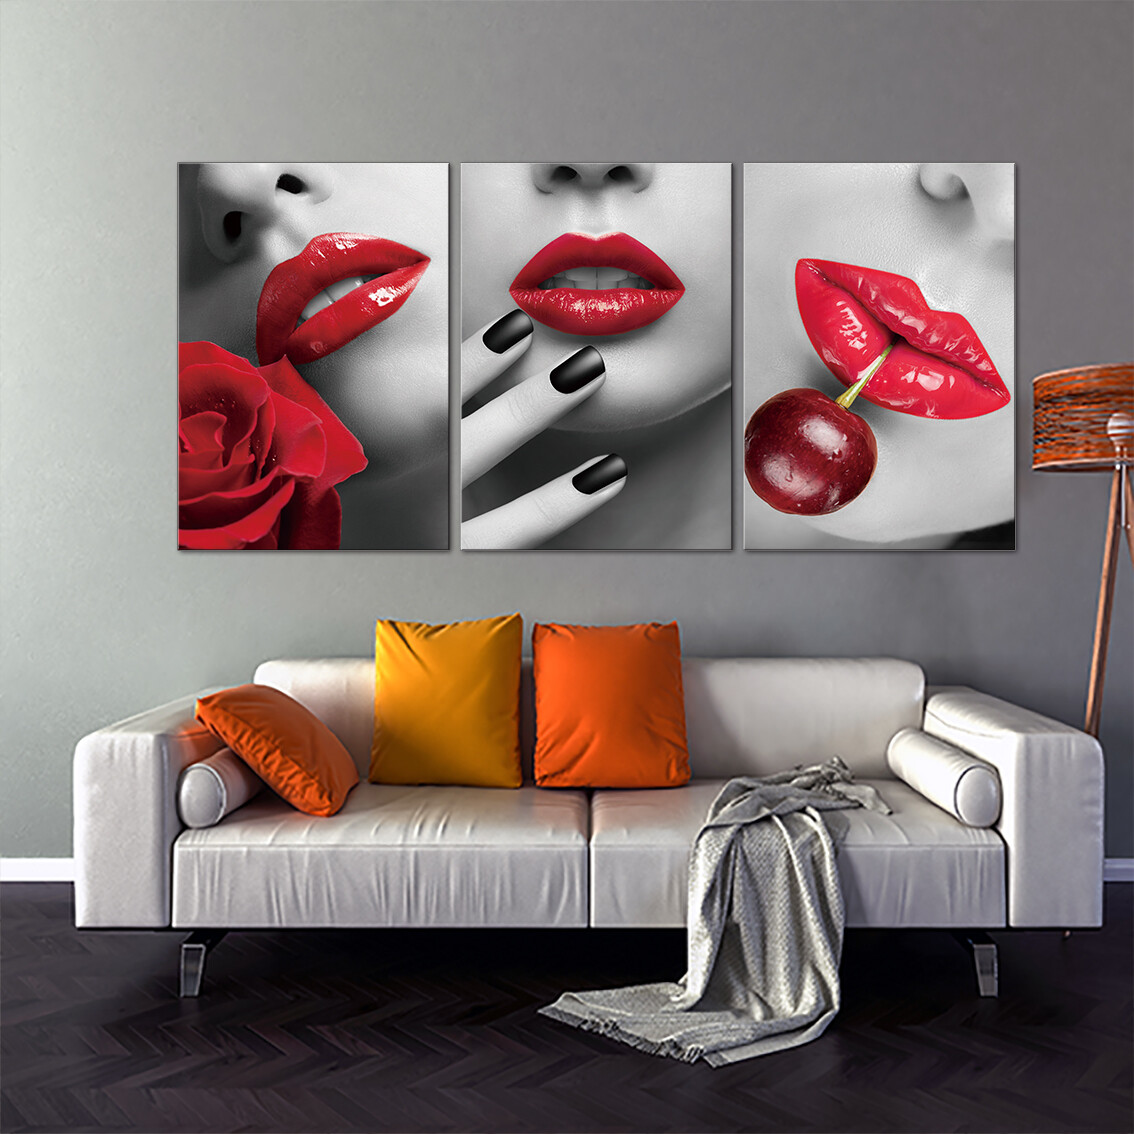 Rose, Red and Black, Cherry - Modern Luxury Wall art Printed on Acrylic Glass - Frameless and Ready to Hang